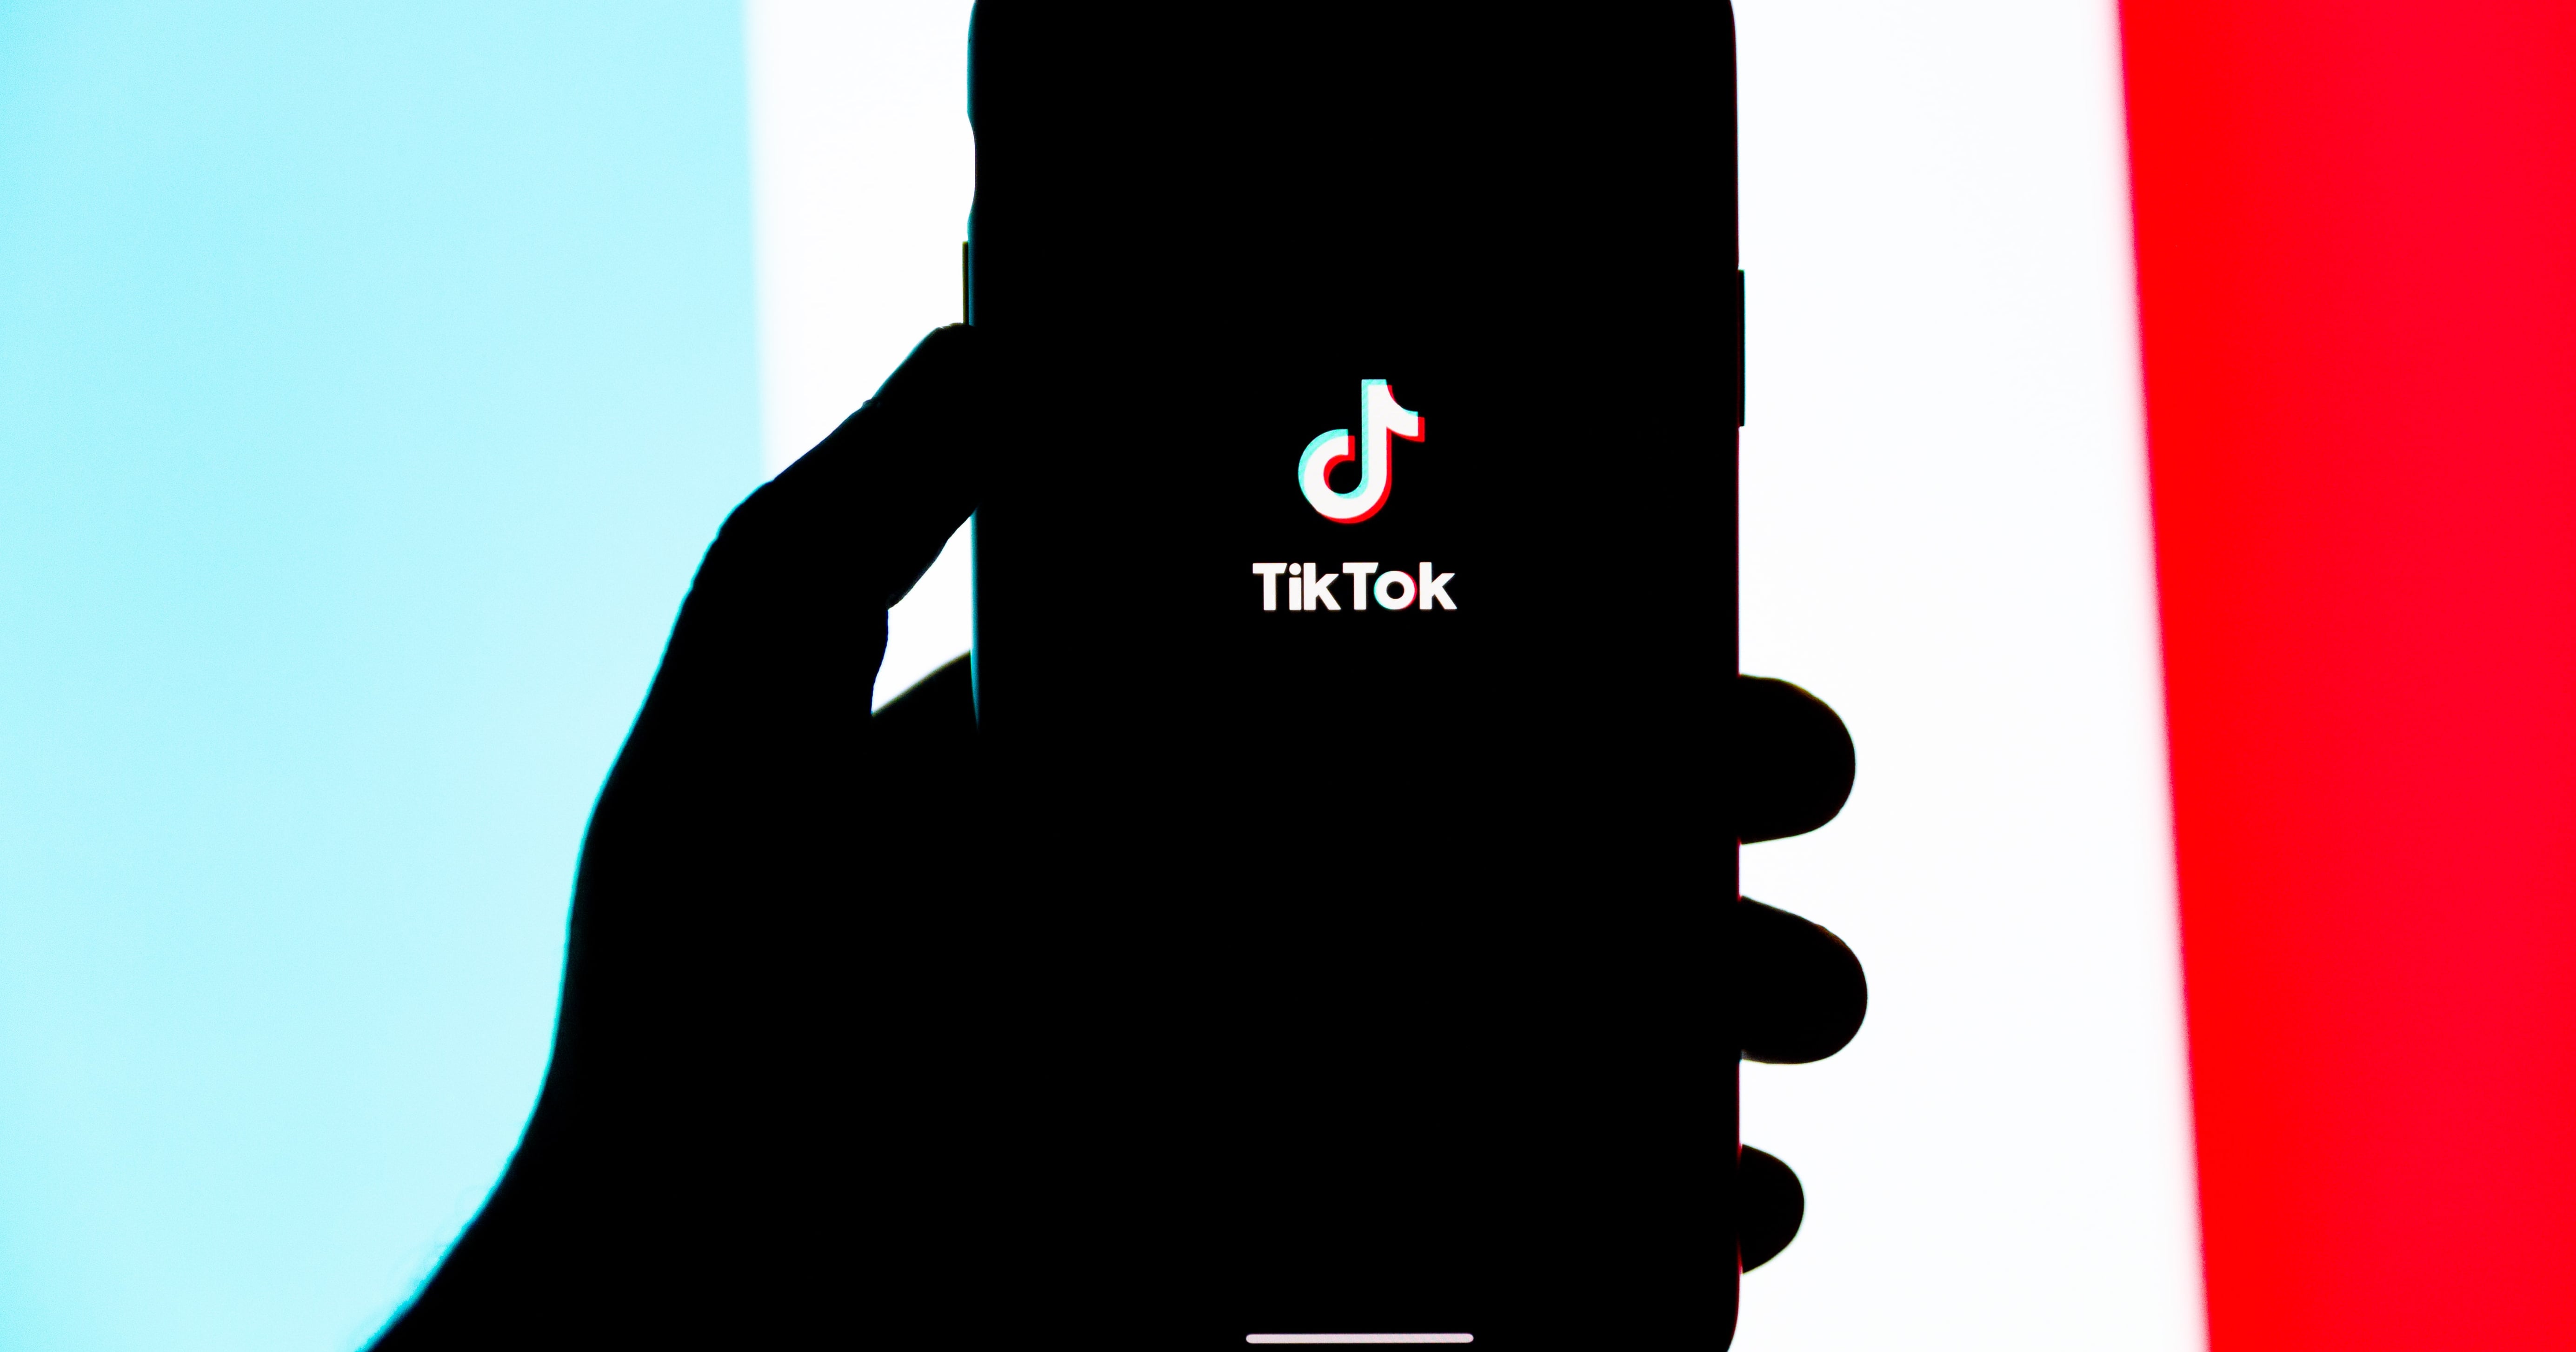 What's The 'Shadow Boxing' Game On TikTok? Let's Explain How To